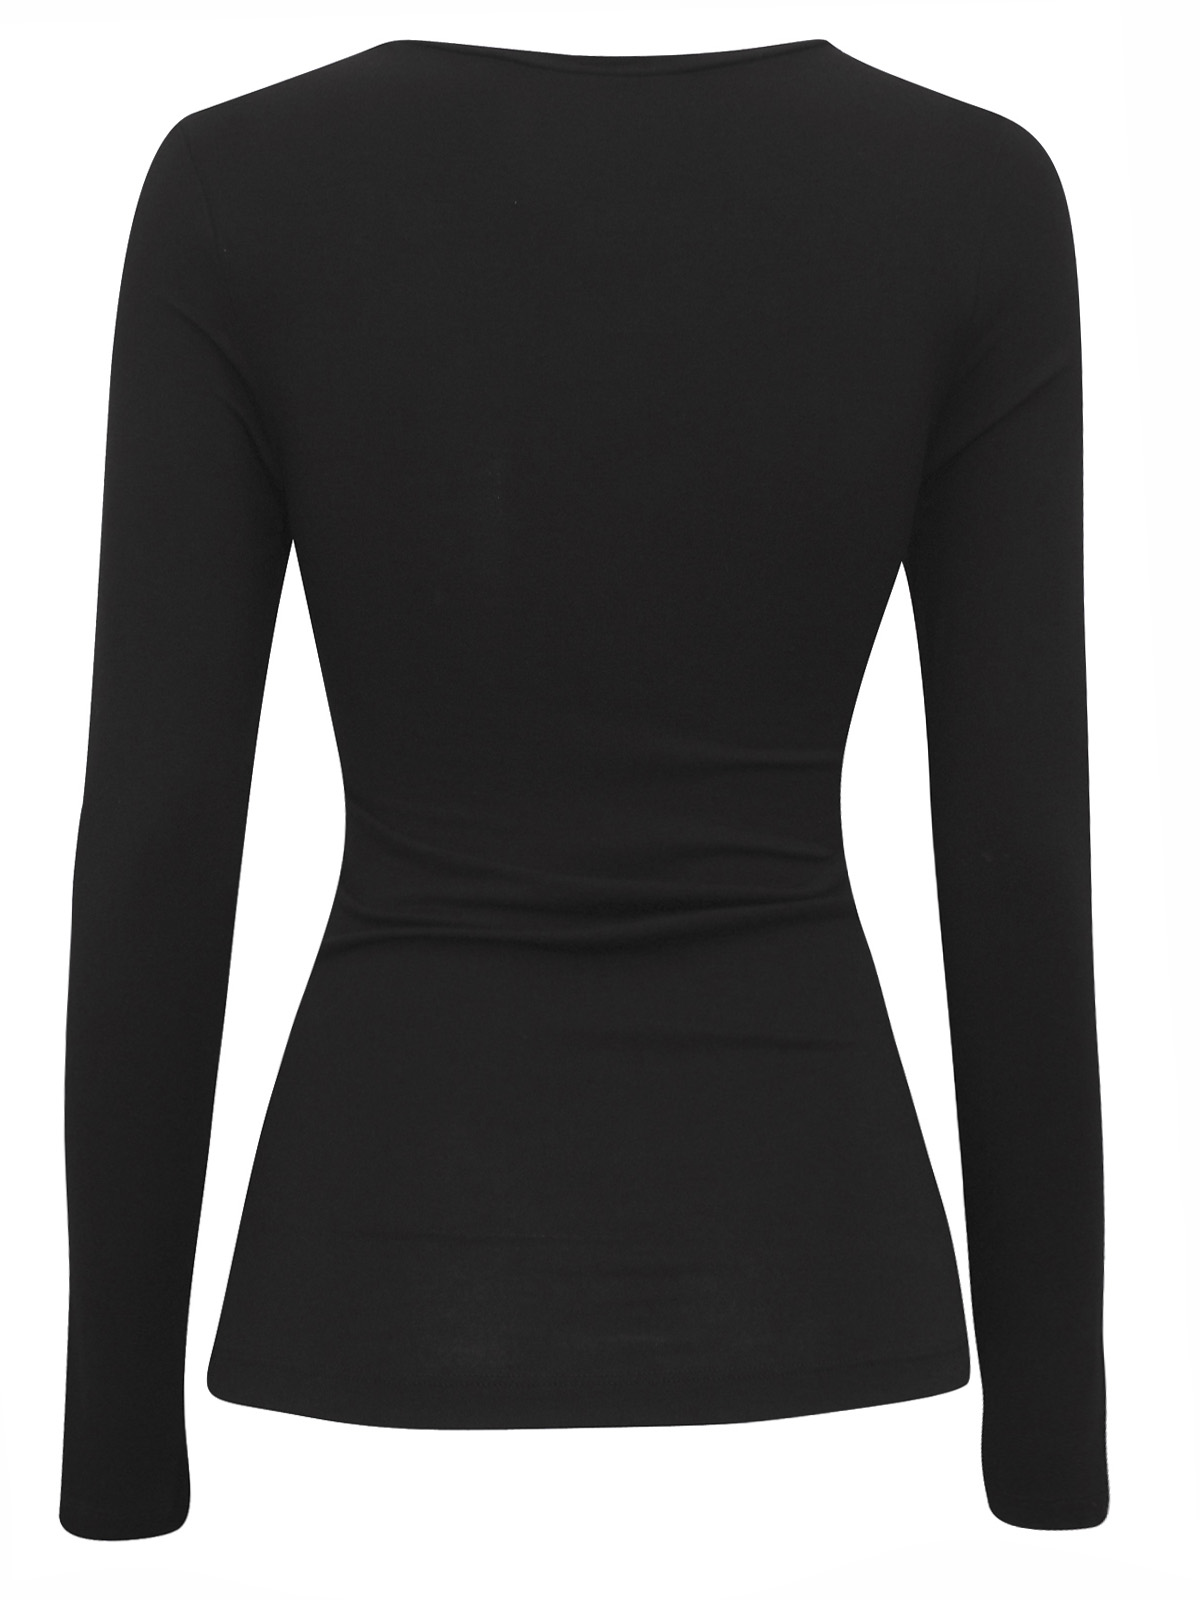 Marks and Spencer - - M&5 BLACK Heatgen Thermal Long Sleeve Top - Size 10